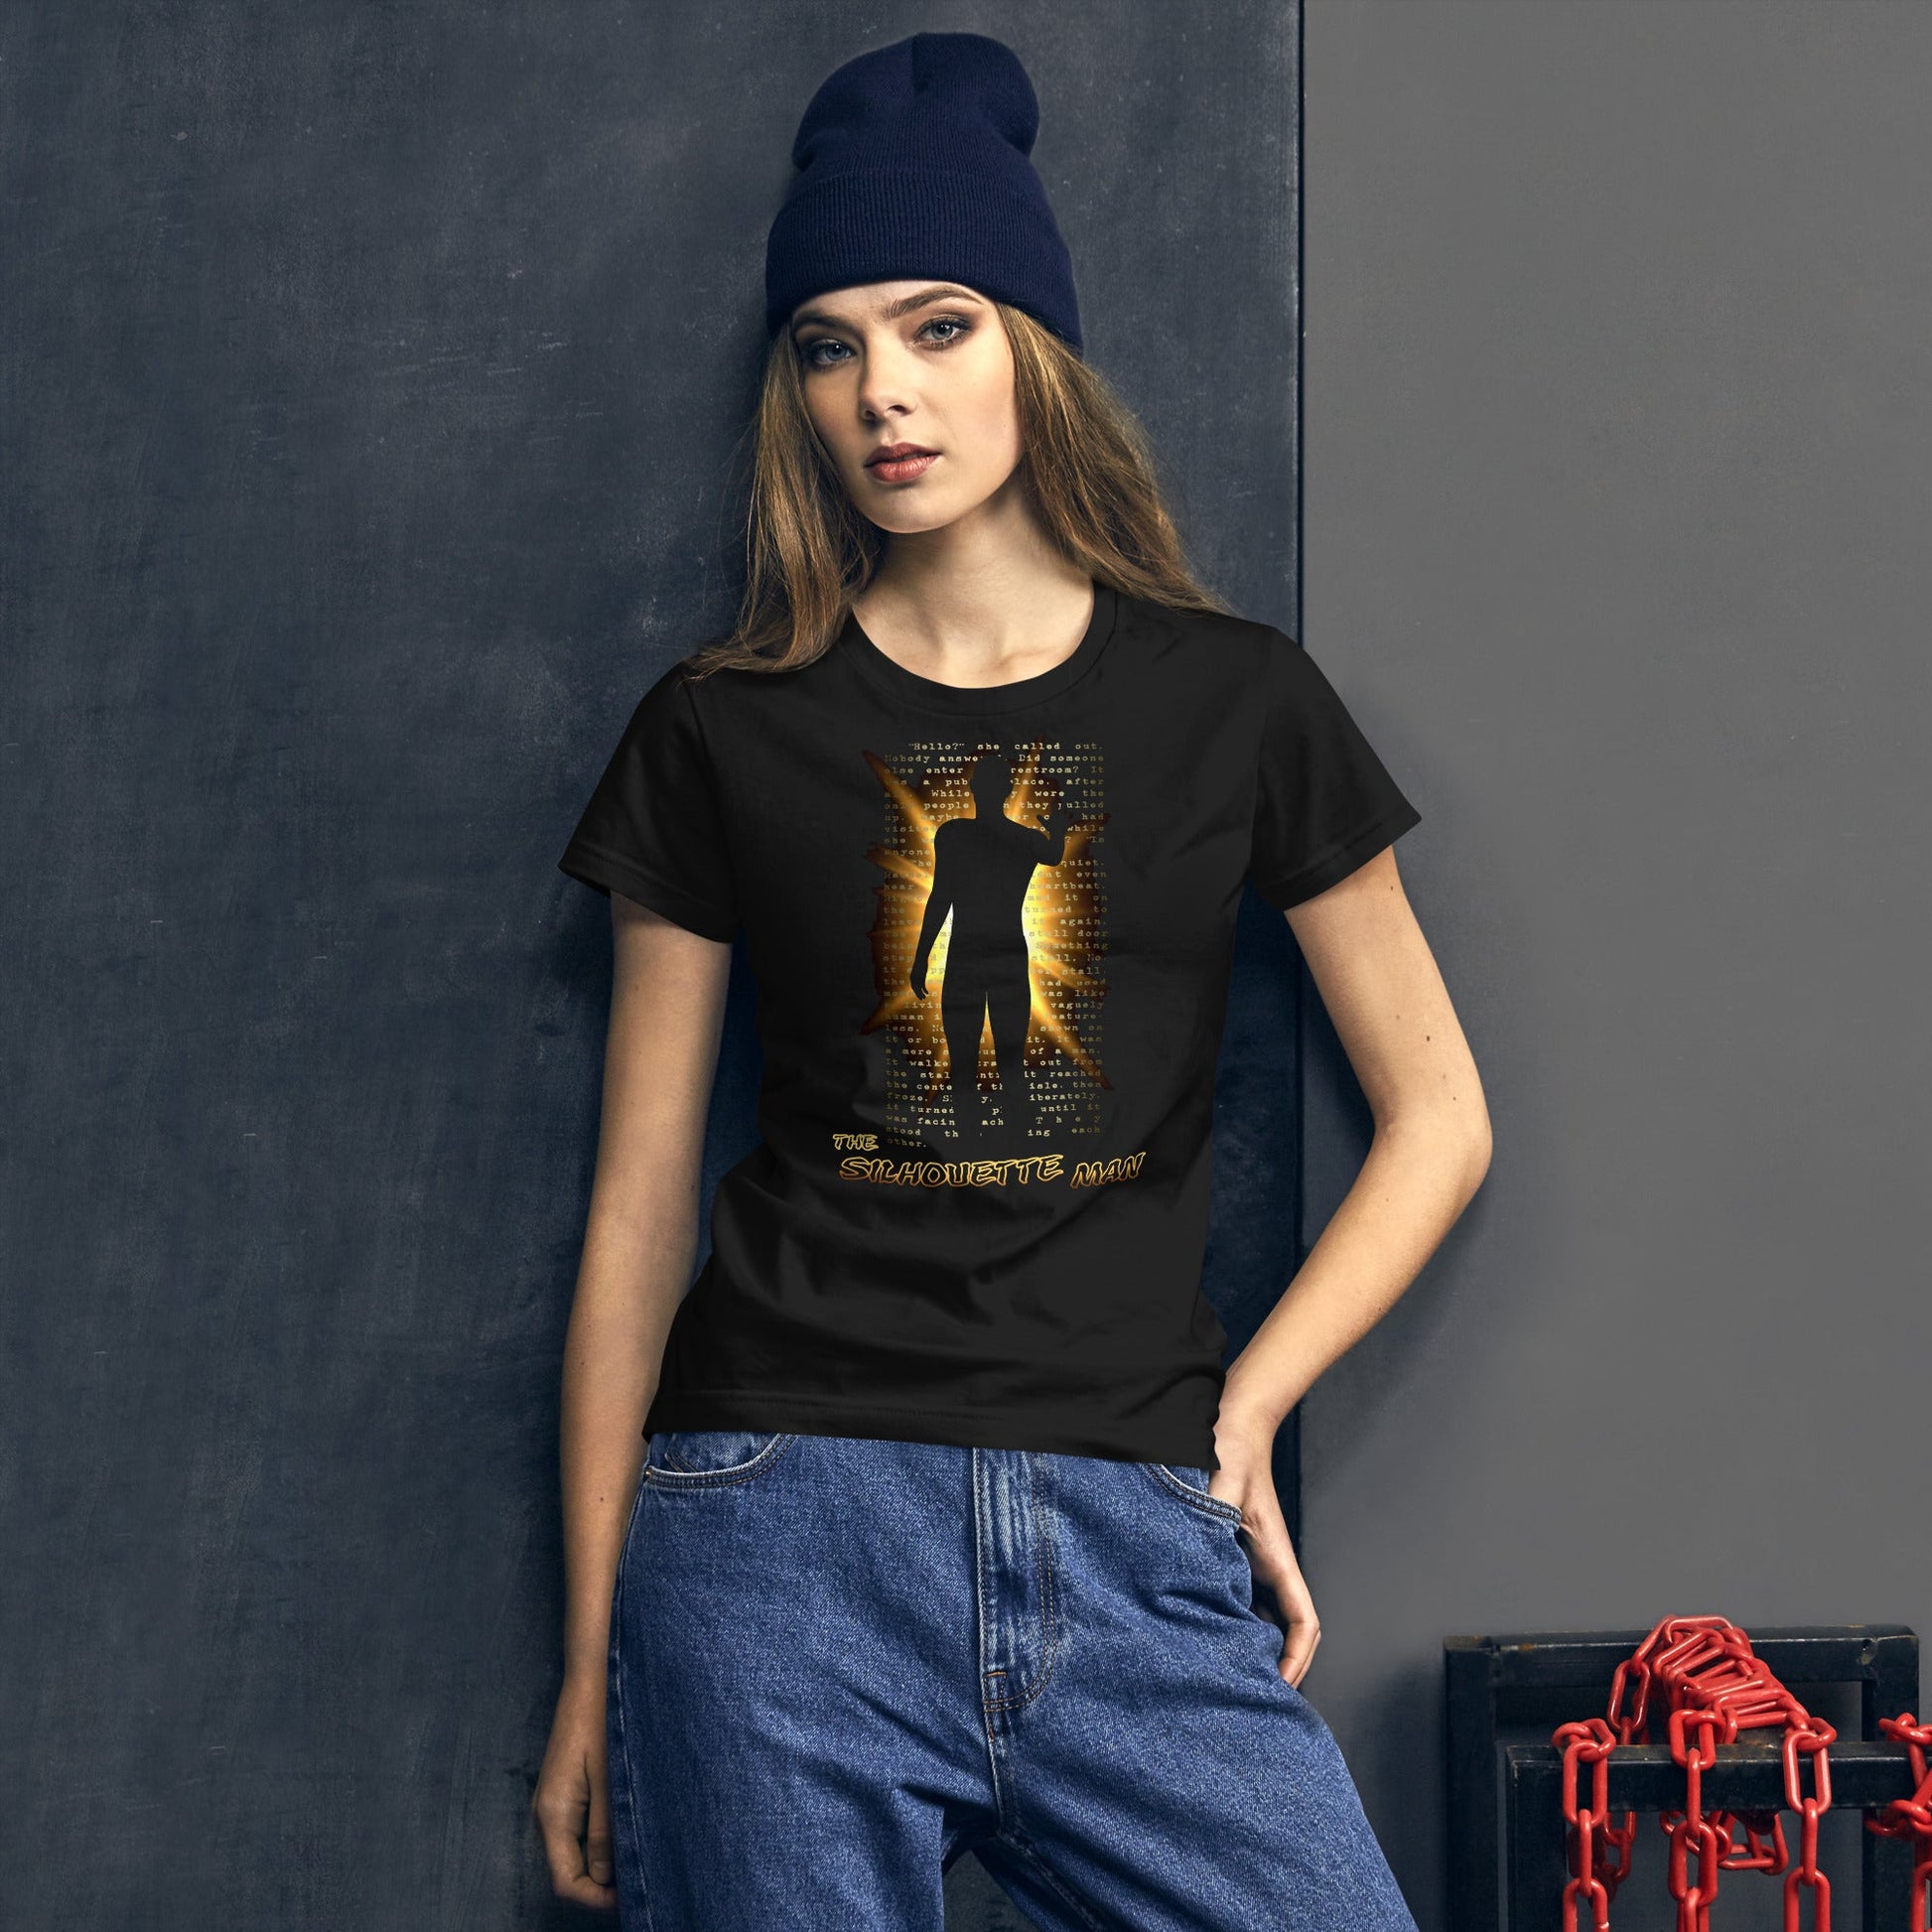 The Silhouette Man | Women's Short Sleeve Tee - Embrace the Shadows - Spectral Ink Shop - T-Shirt -6582435_4902